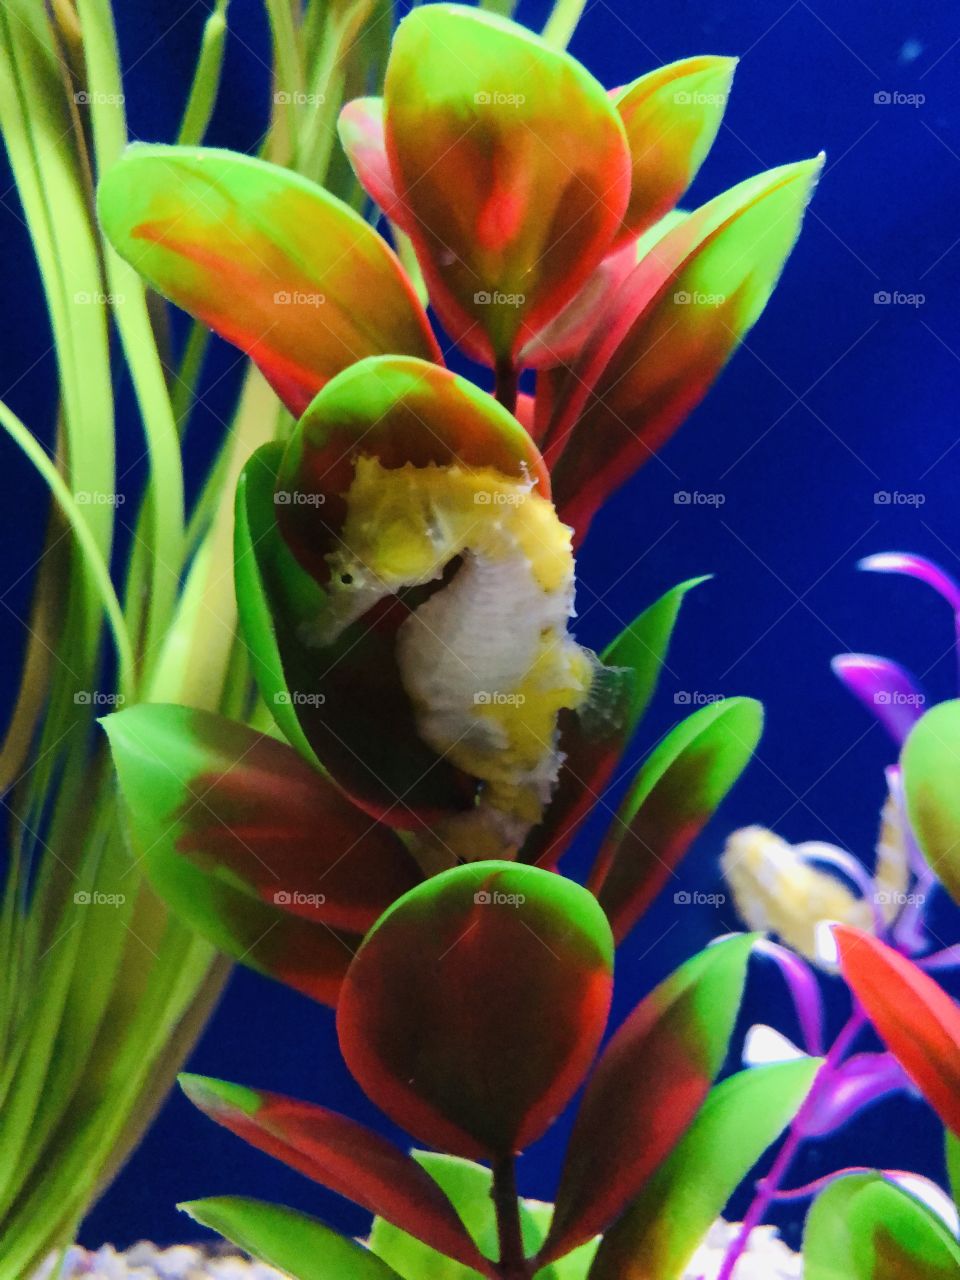 Bright yellow seahorse hides among the foliage - what dramatic colours!